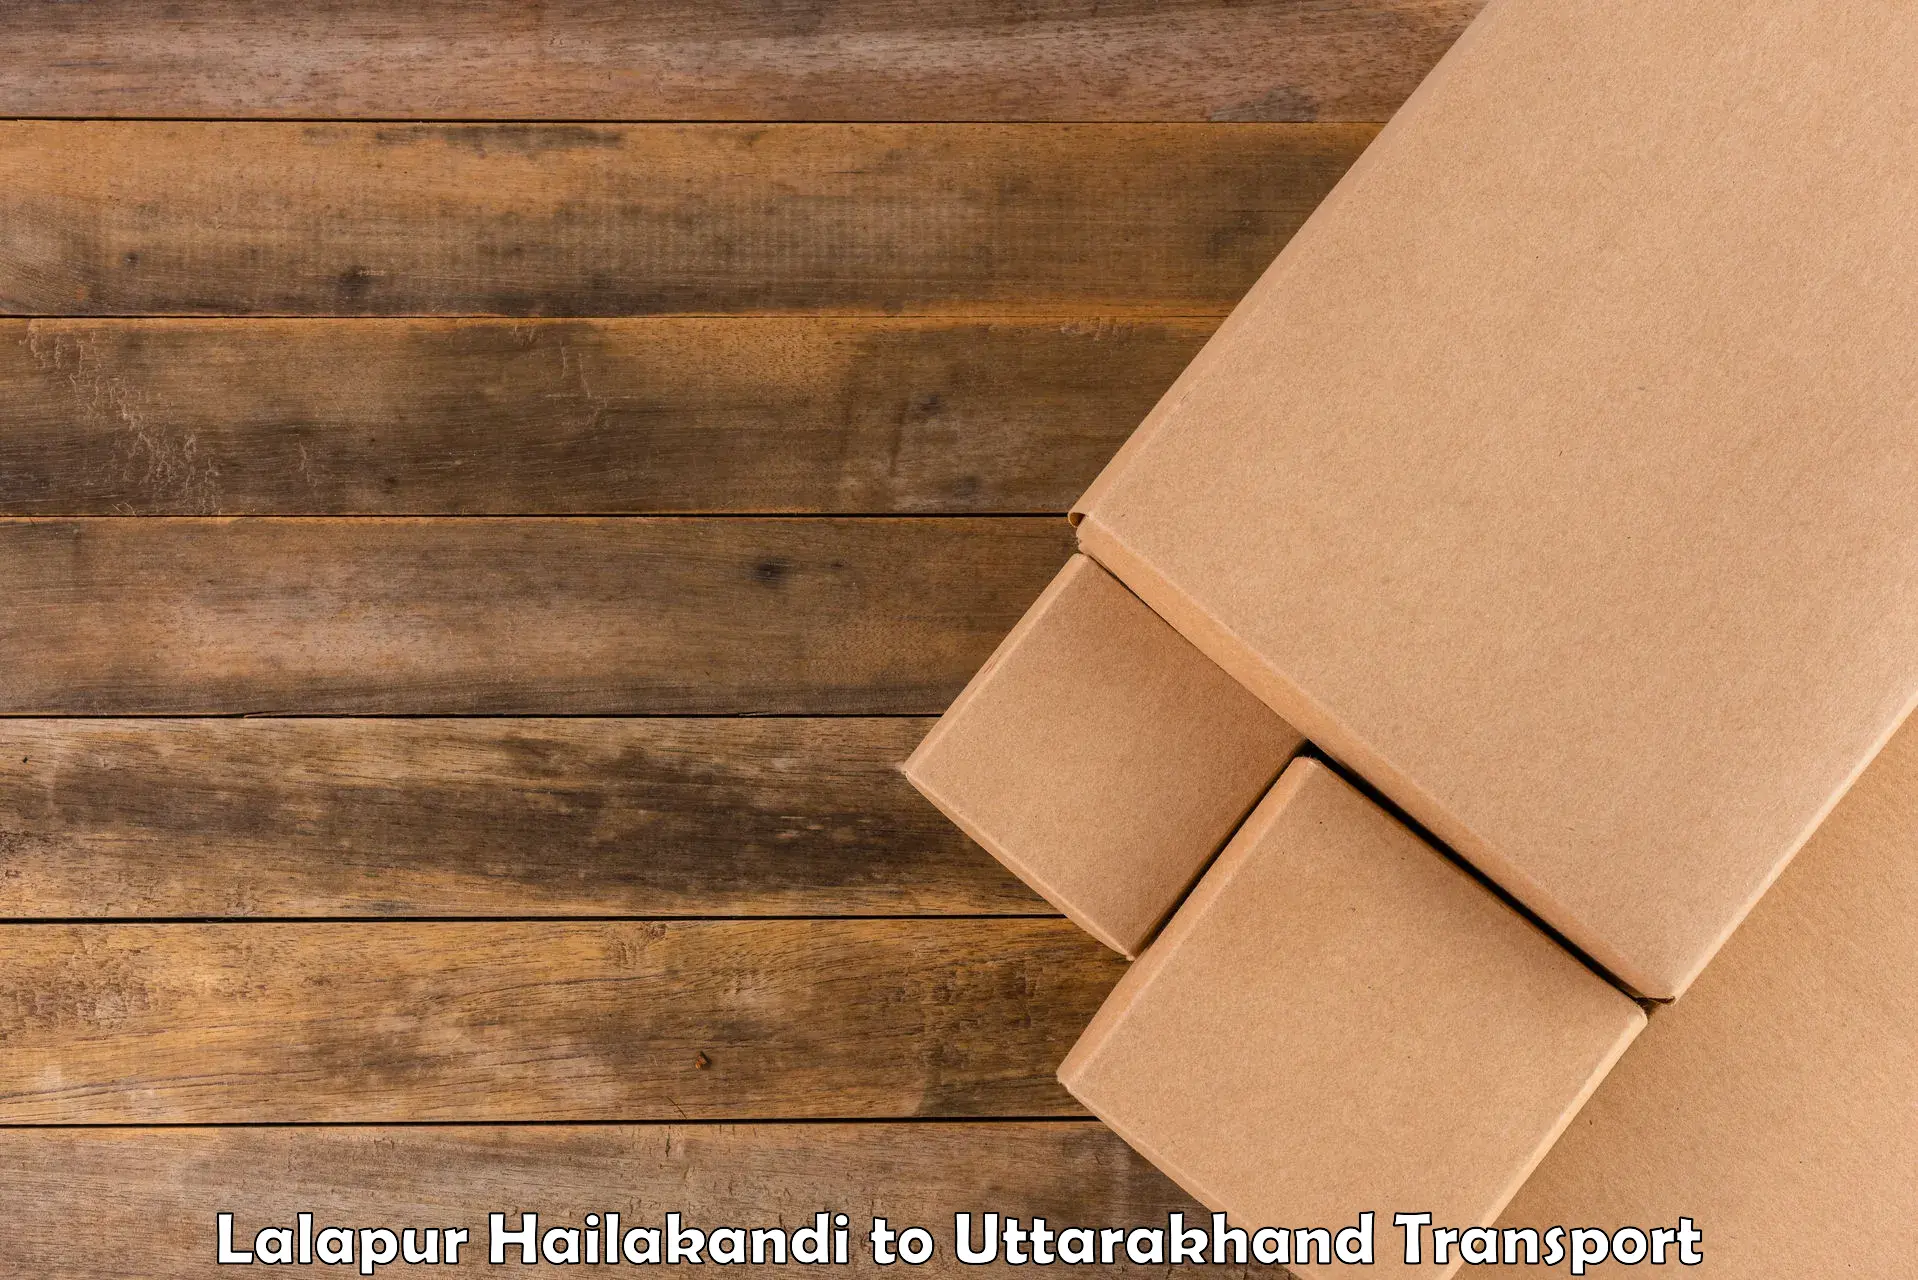 Luggage transport services Lalapur Hailakandi to Mussoorie